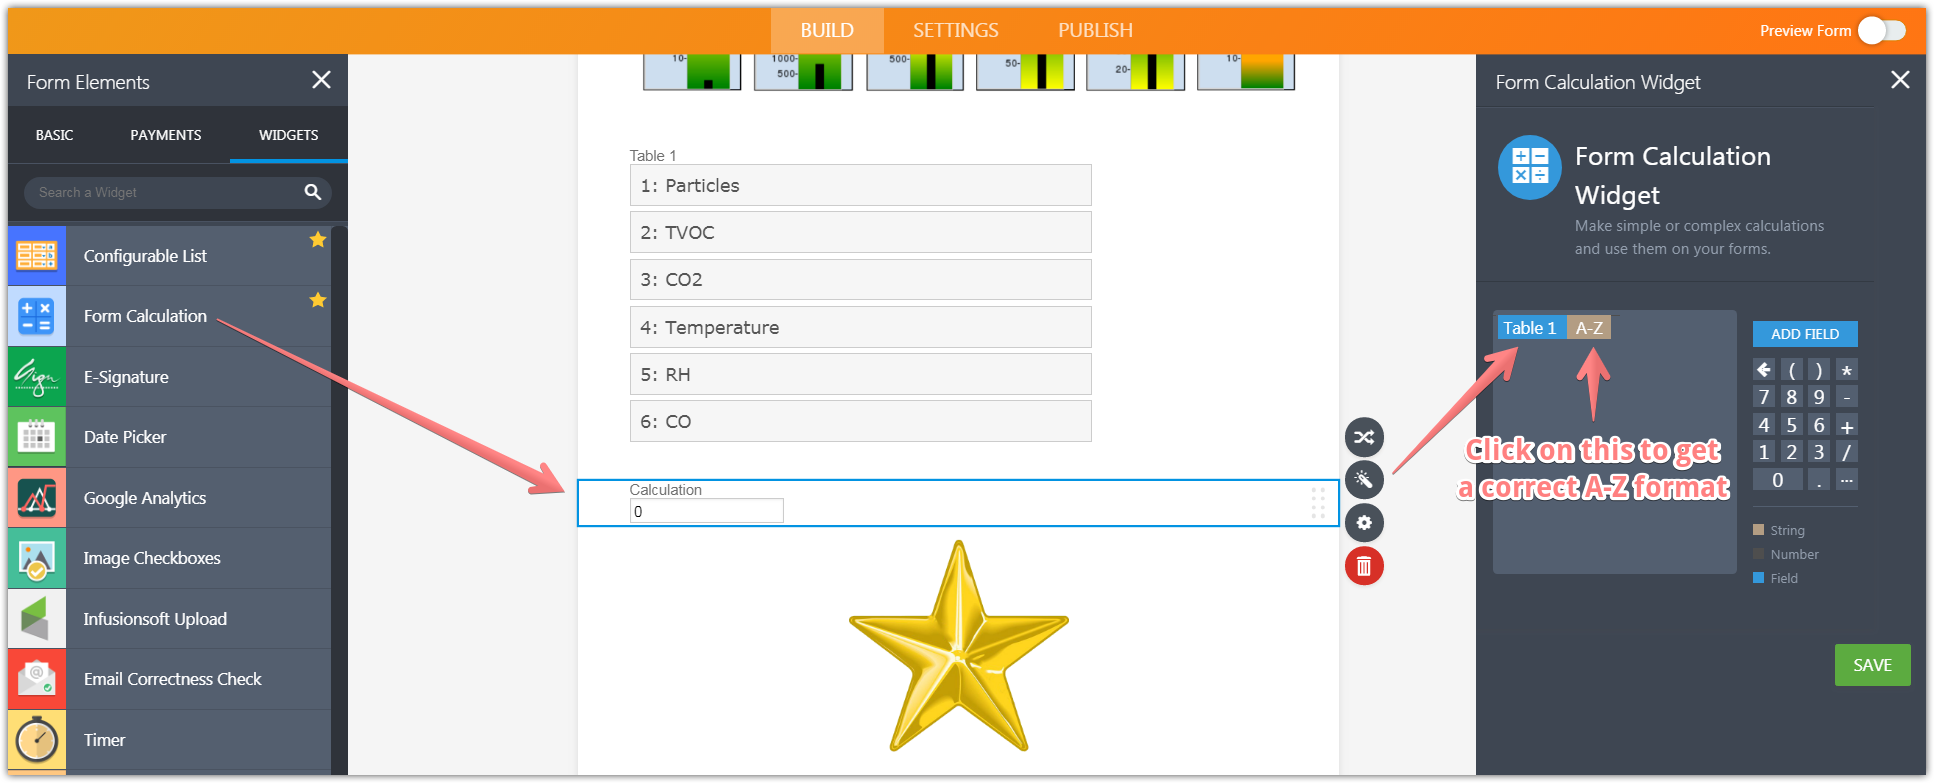 Orderable List Widget: Indicate correct or incorrect order of list Image 1 Screenshot 30